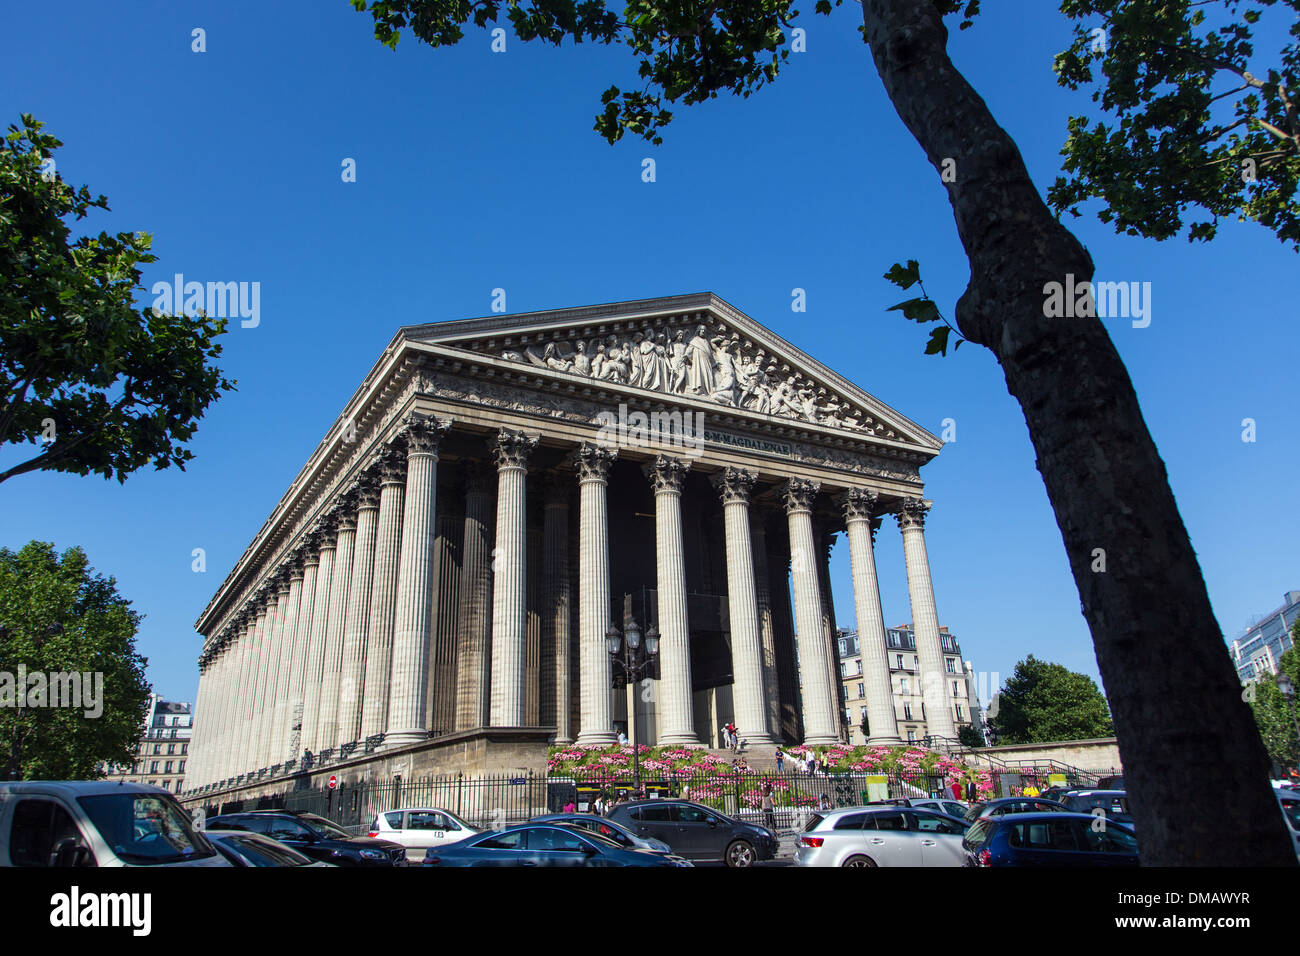 CHURCH OF THE MADELEINE IN A NEOCLASSICAL ARCHITECTURAL STYLE, PLACE DE LA MADELEINE, PARIS (75), FRANCE Stock Photo